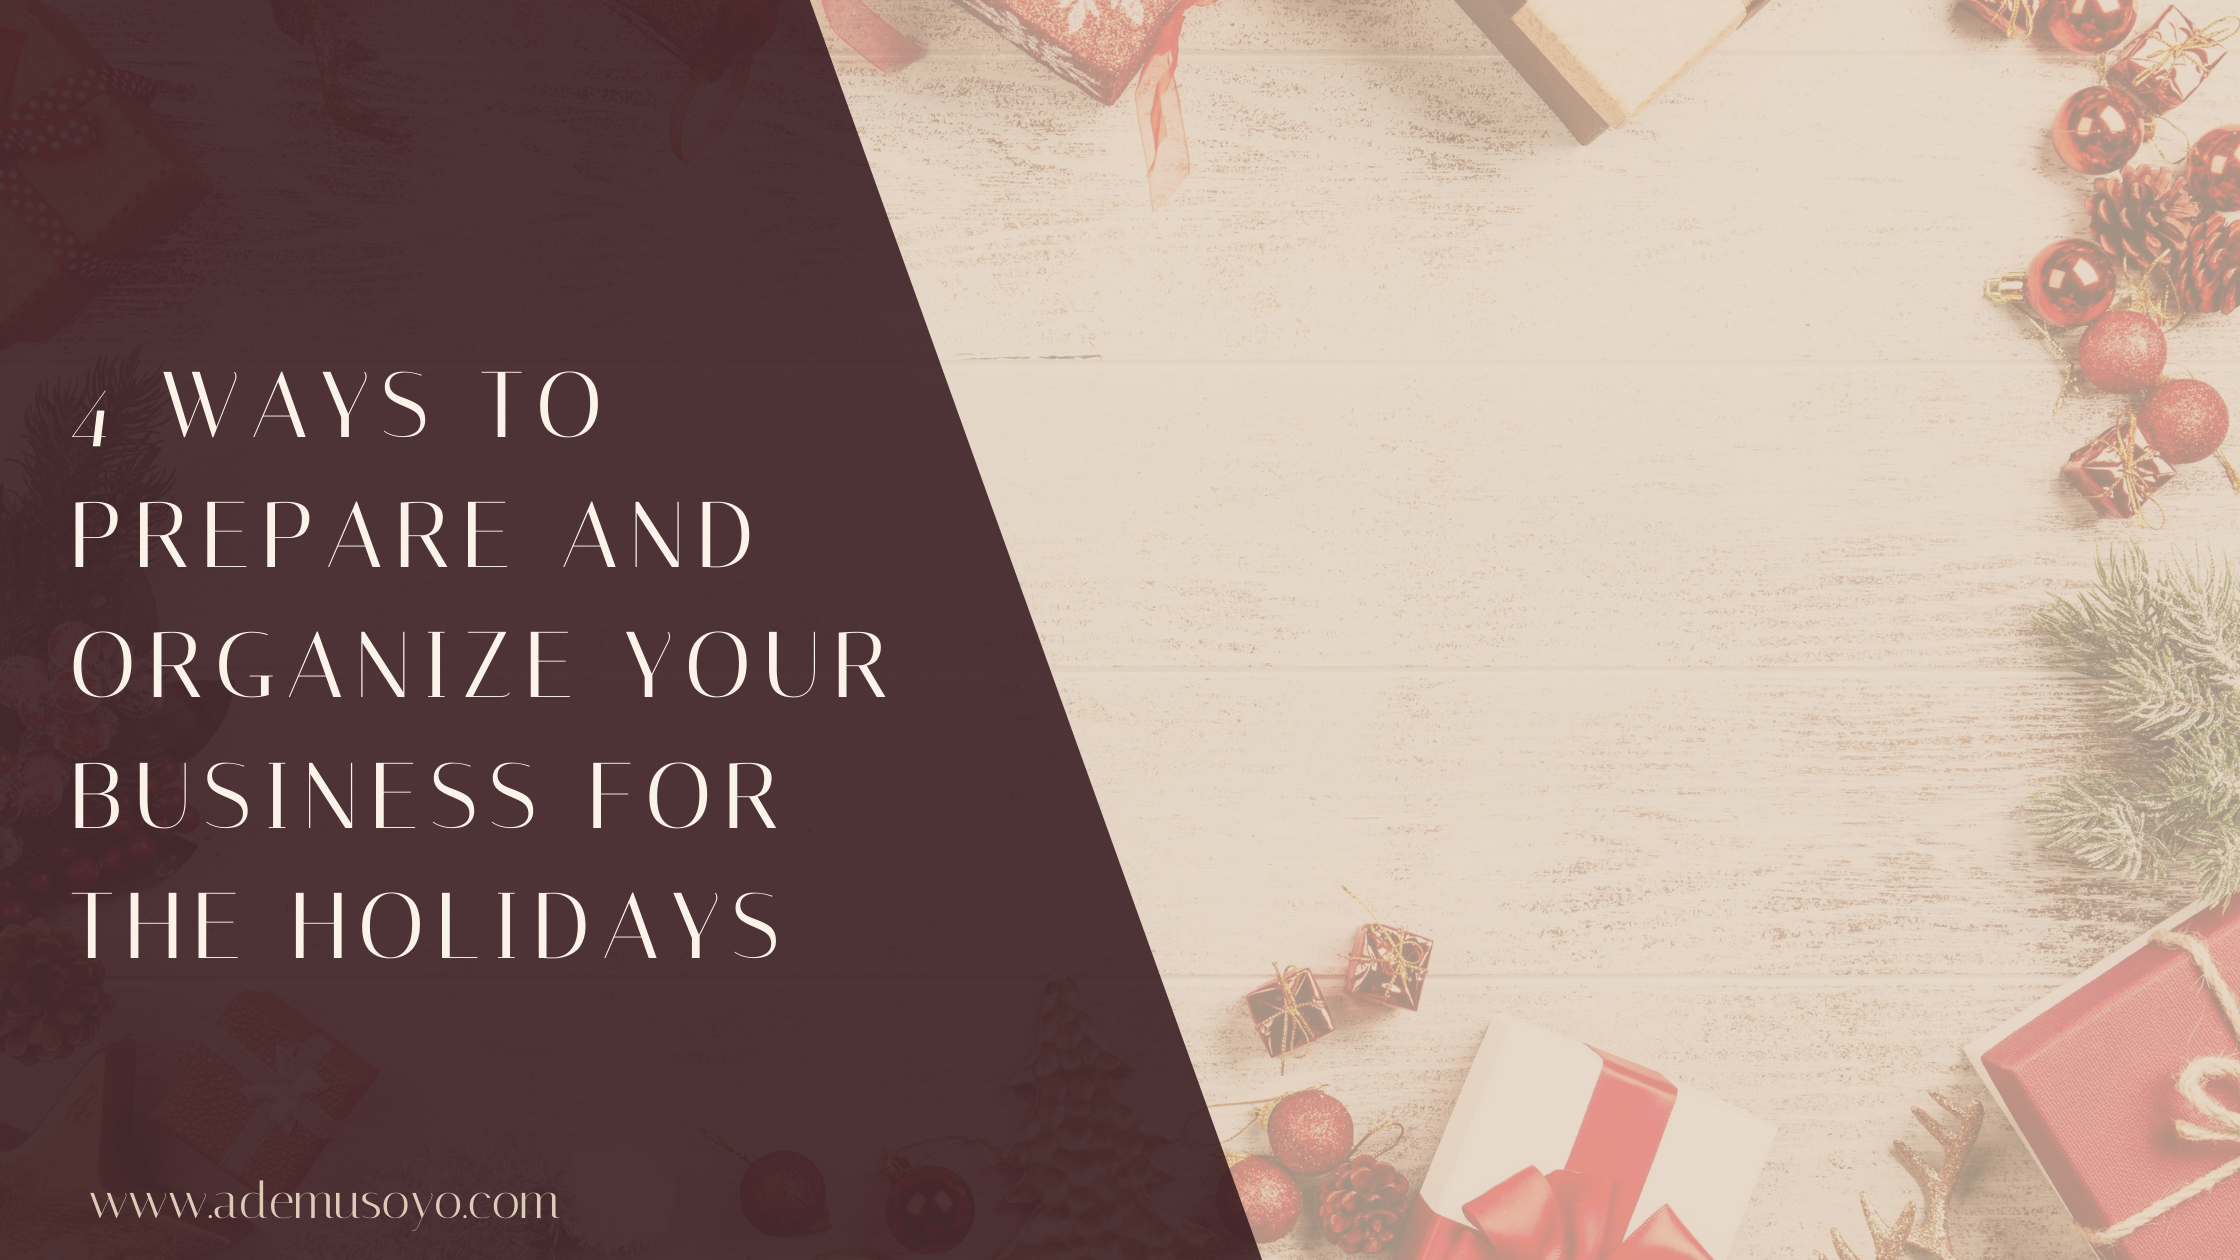 How To Prepare Your Business for the Holidays